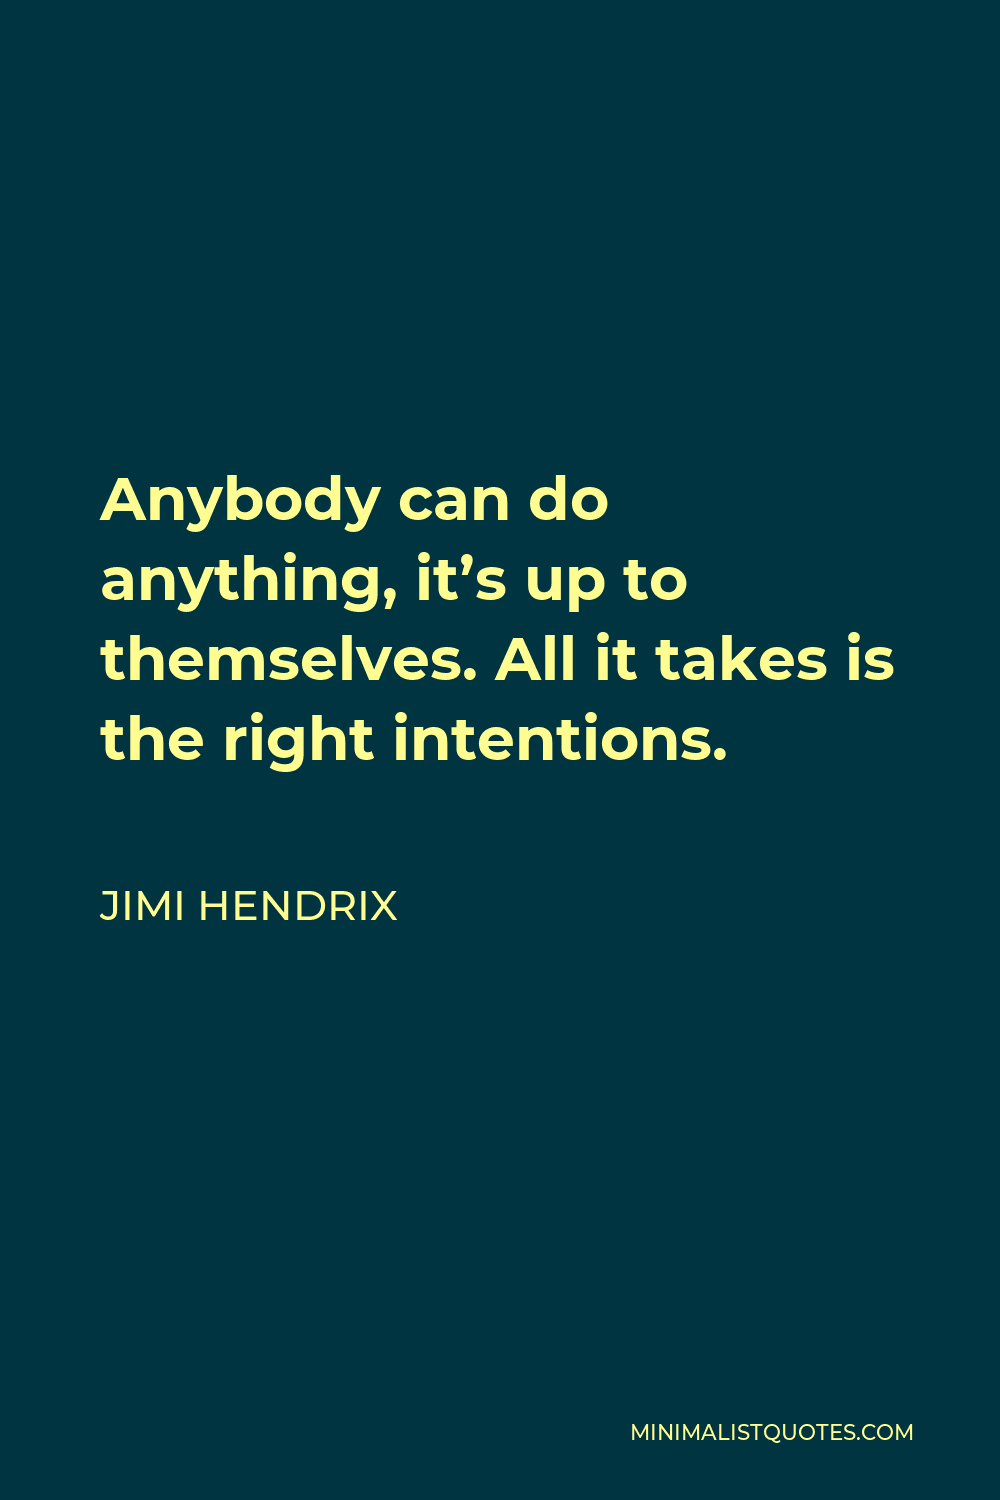 Jimi Hendrix Quote - Anybody can do anything, it’s up to themselves. All it takes is the right intentions.